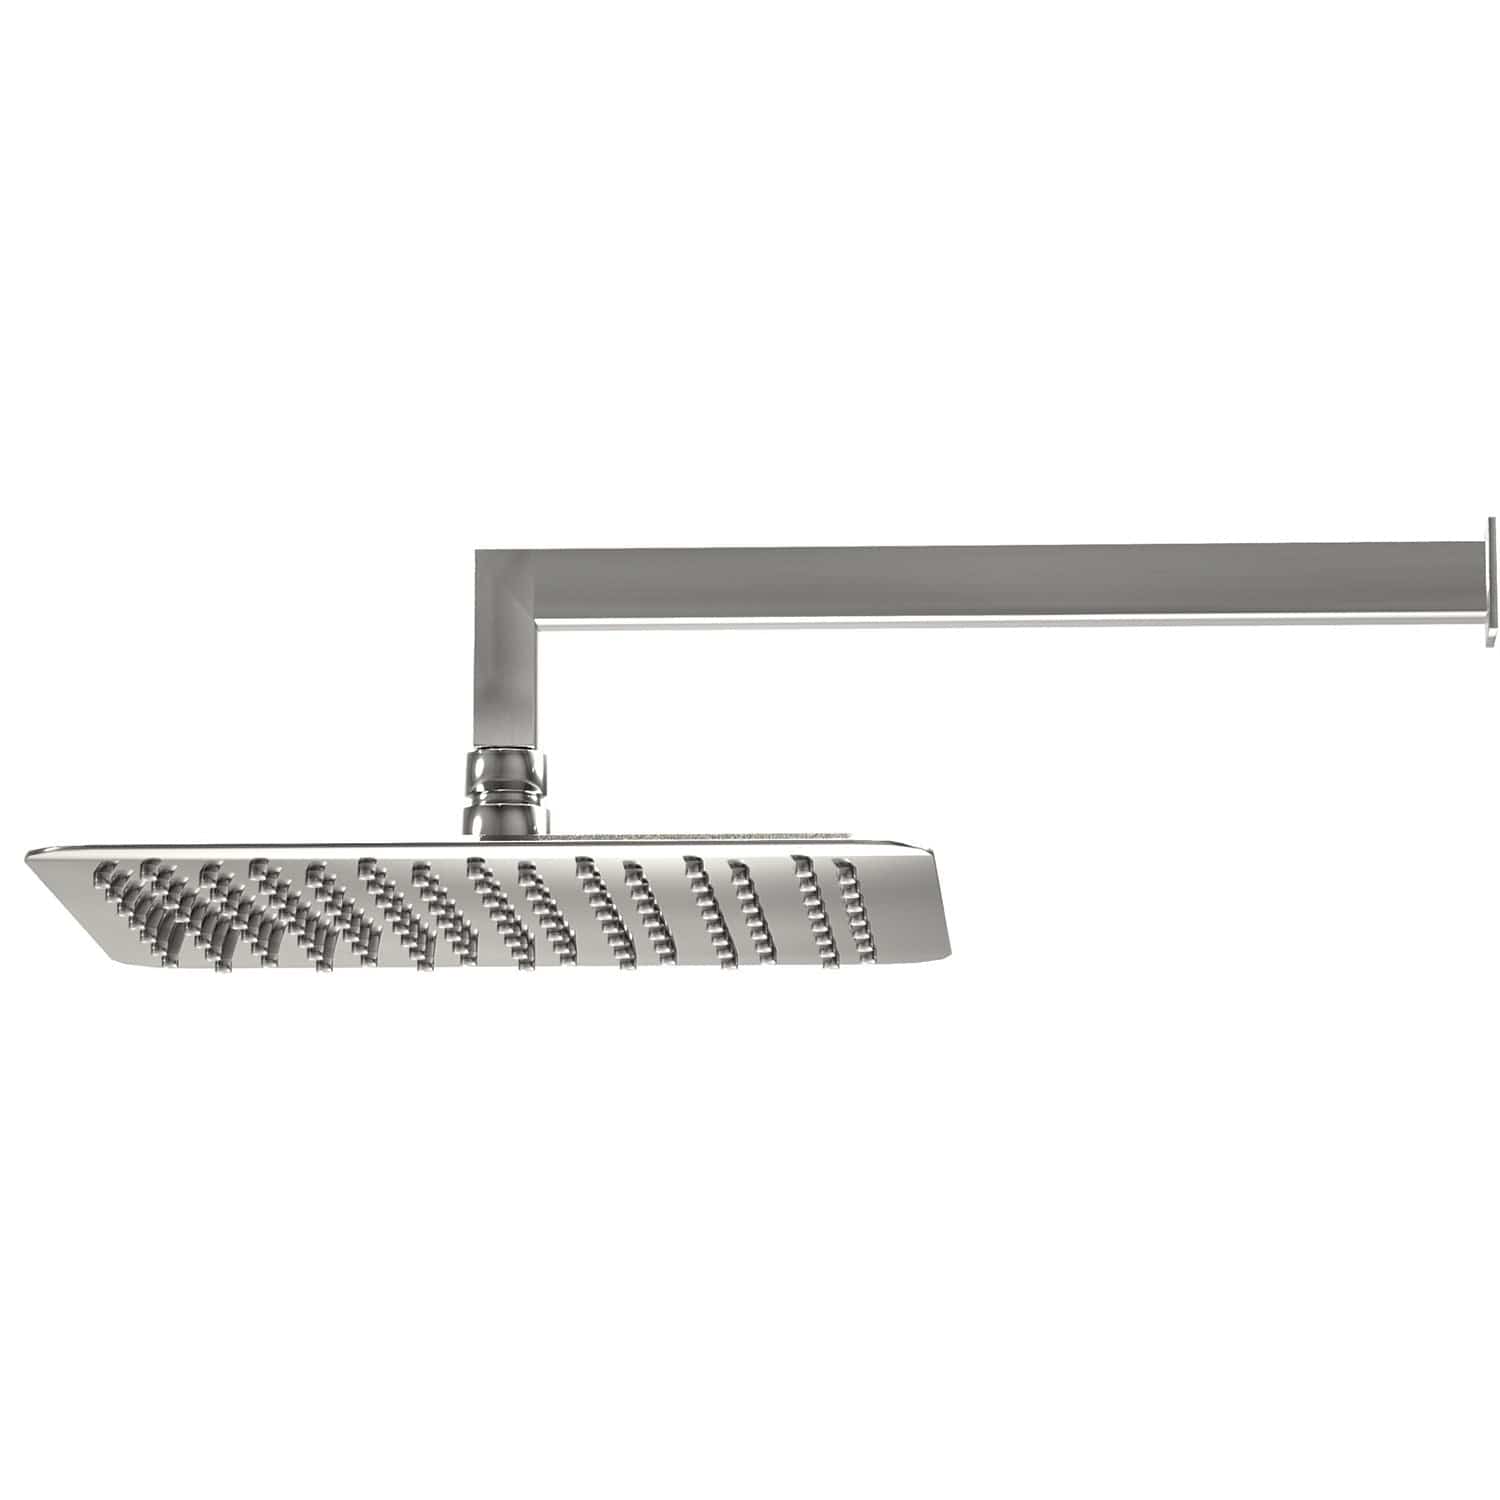 Grohe Power & Soul 190 Head Shower with 4+ Sprays, Chrome | Supply Master | Accra, Ghana Shower Head Buy Tools hardware Building materials